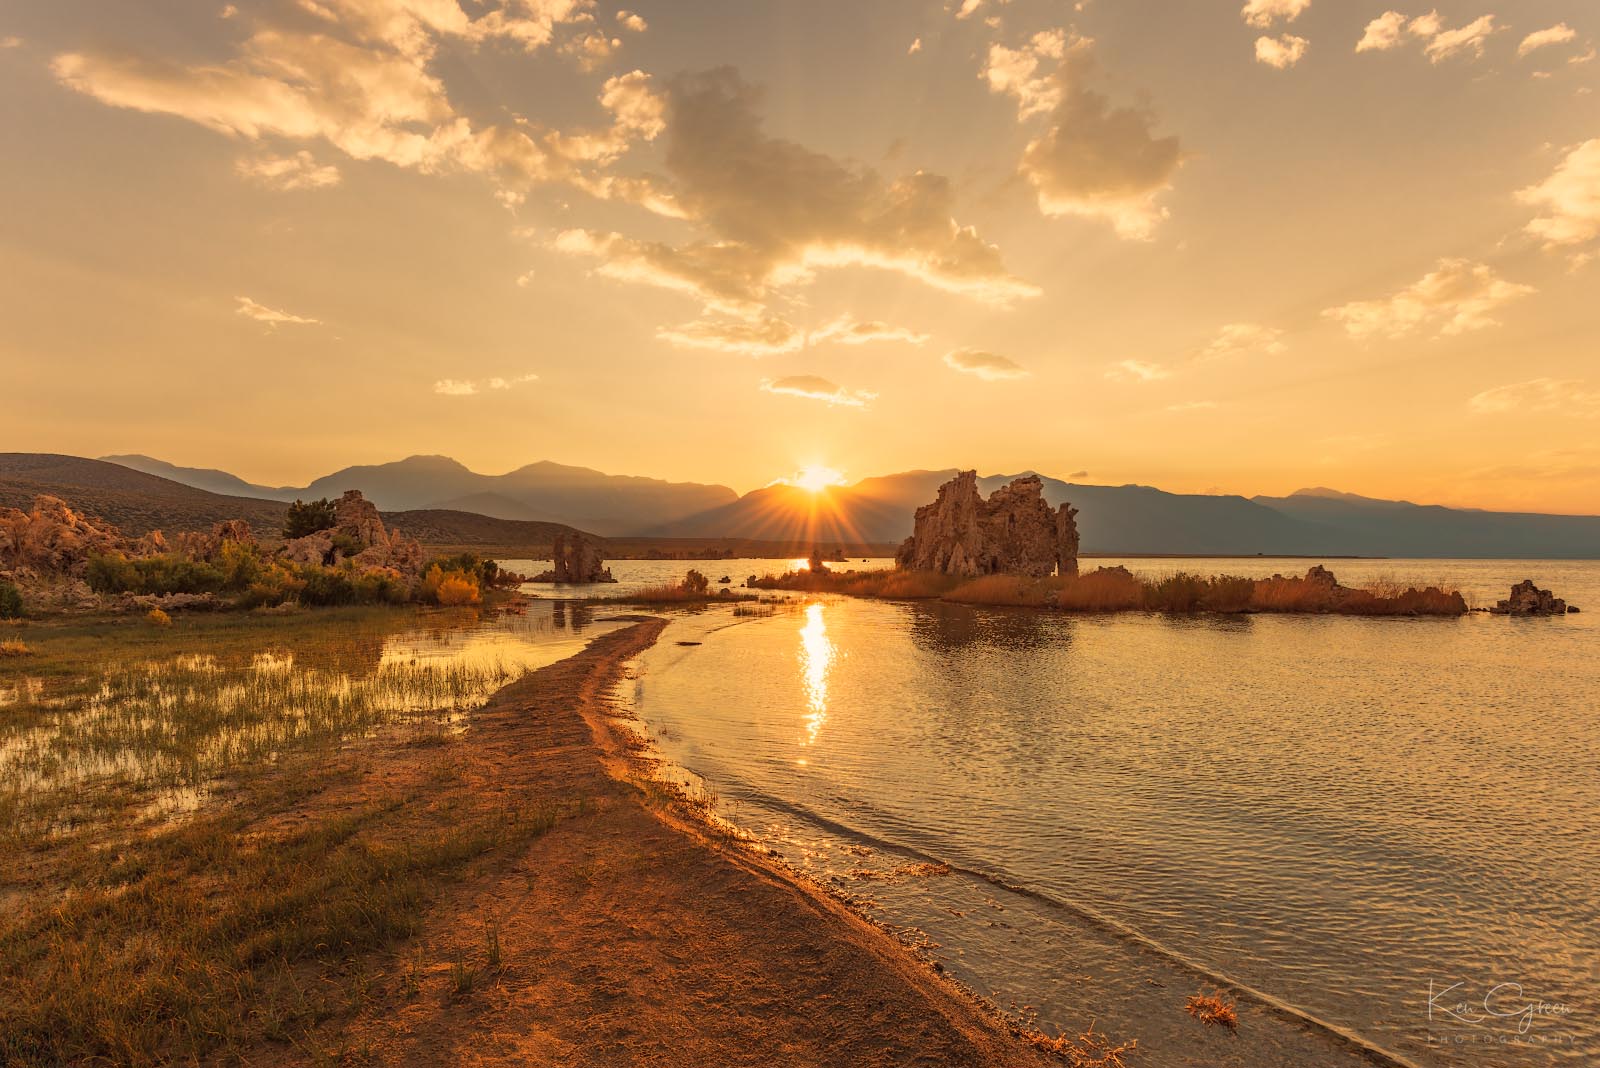 Mono Lake is calm and peaceful as the Sierra Nevada mountains is given a little kiss at sunset.